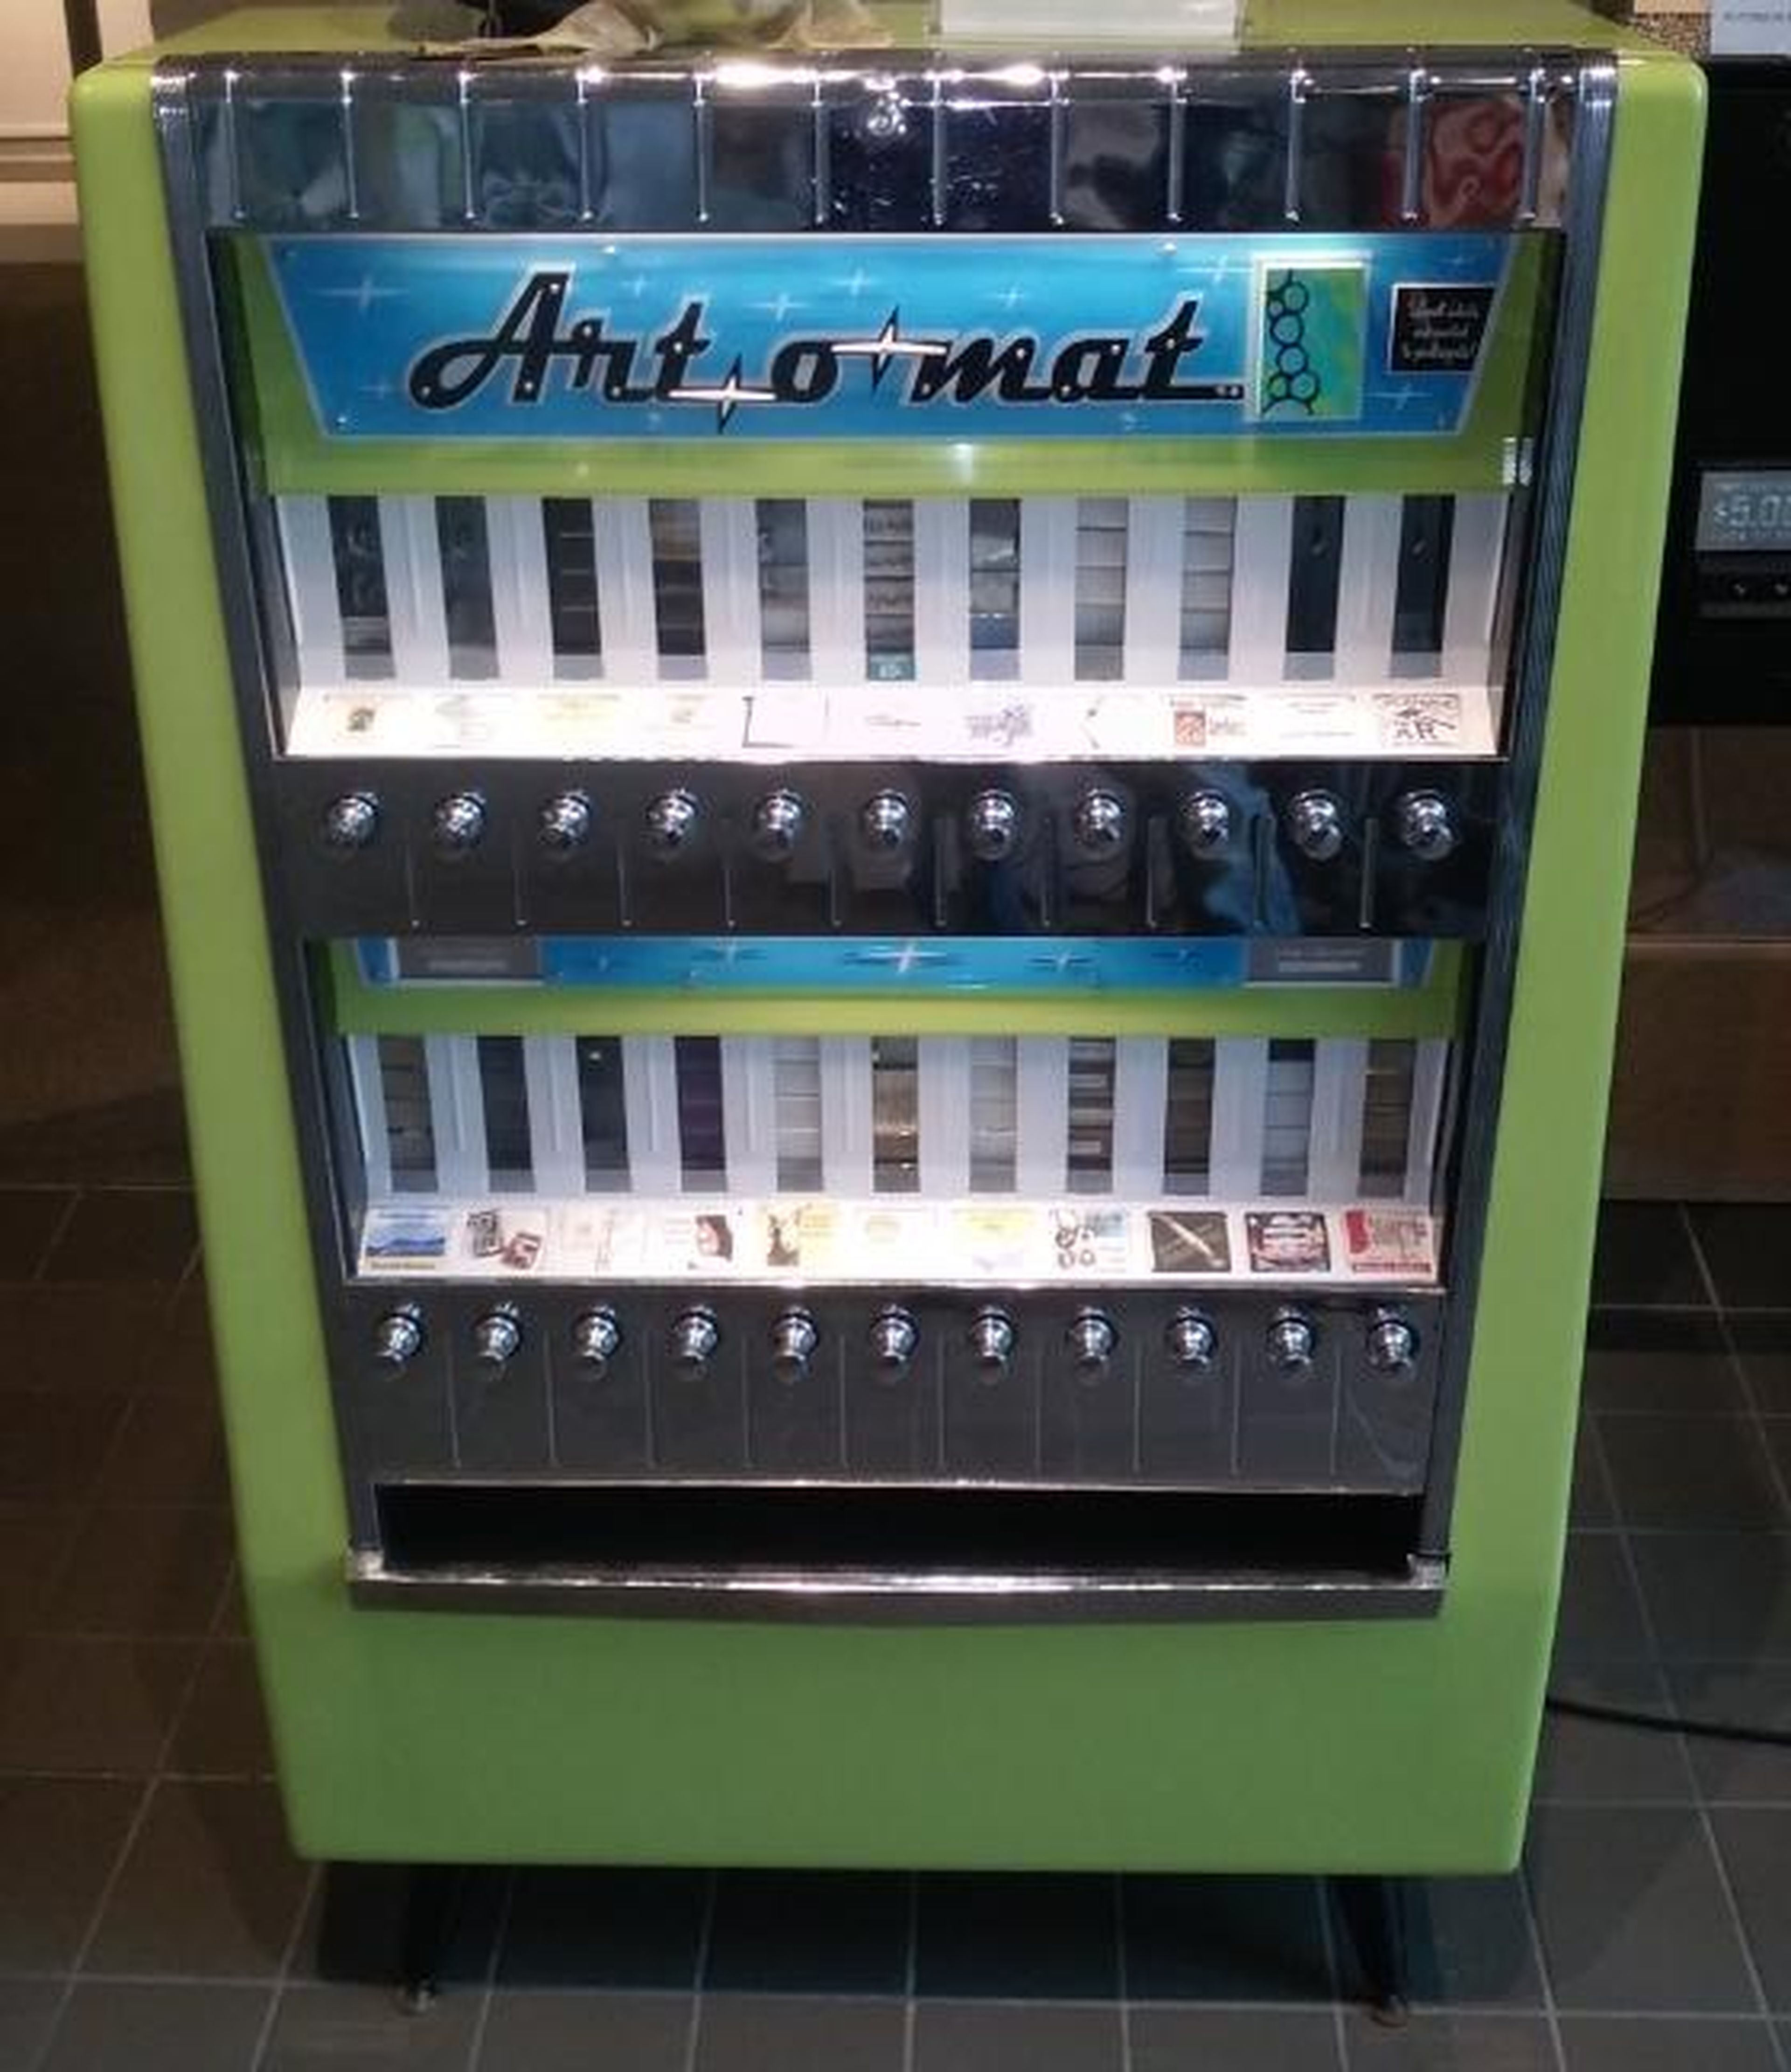 It's made from what used to be a cigarette vending machine.